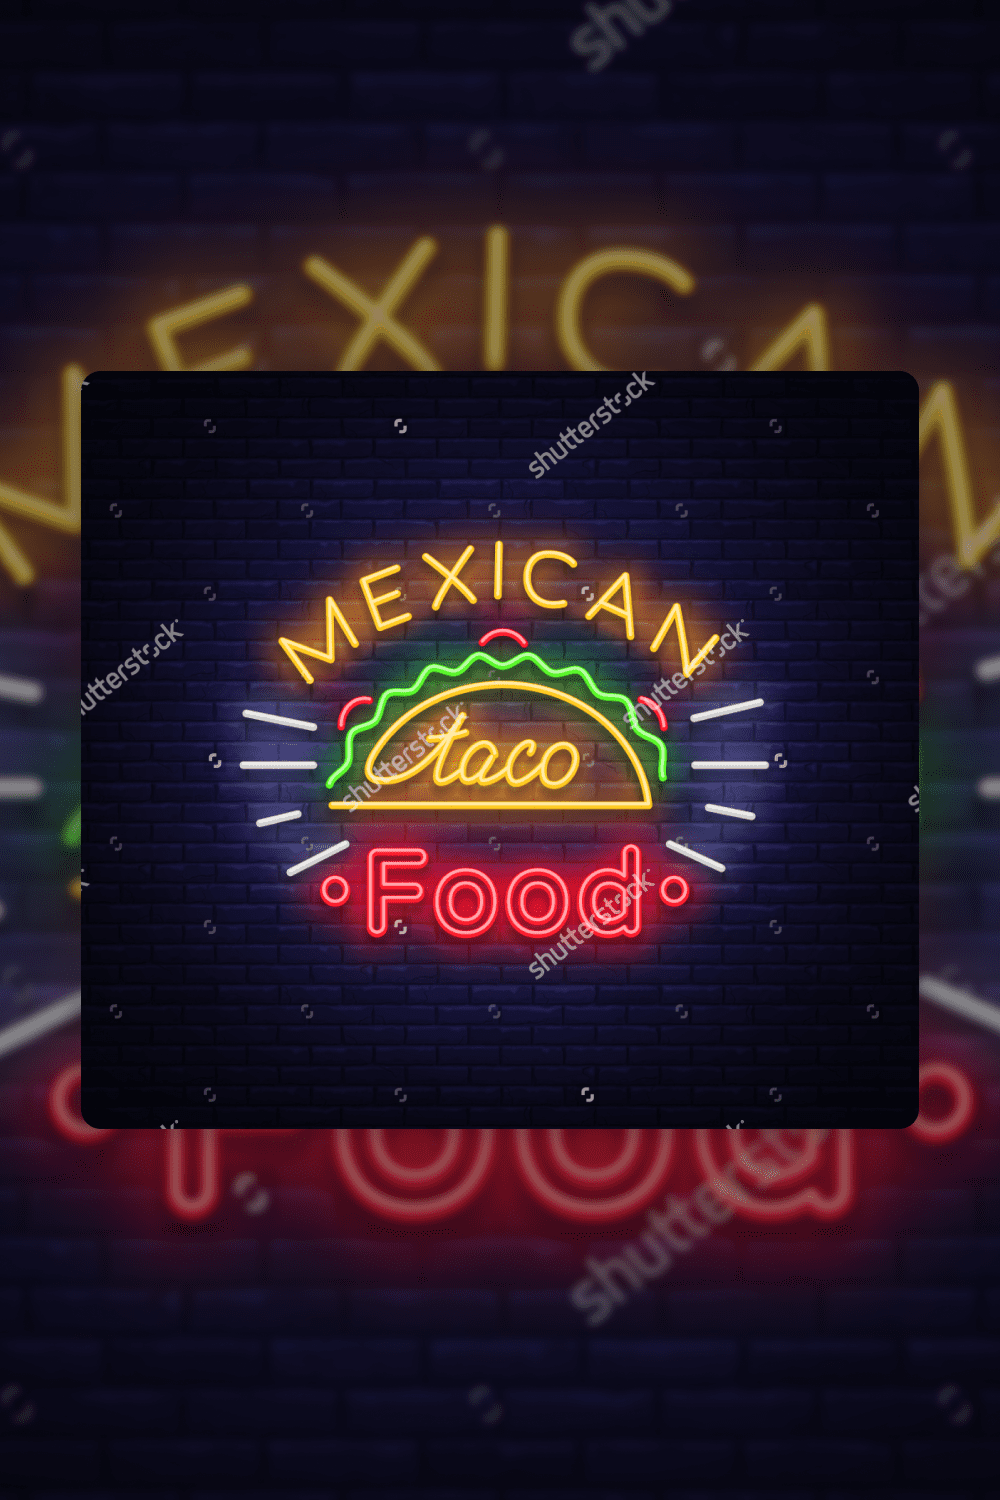 Neon sign on Mexican food, Tacos, street food, fast food, snack.